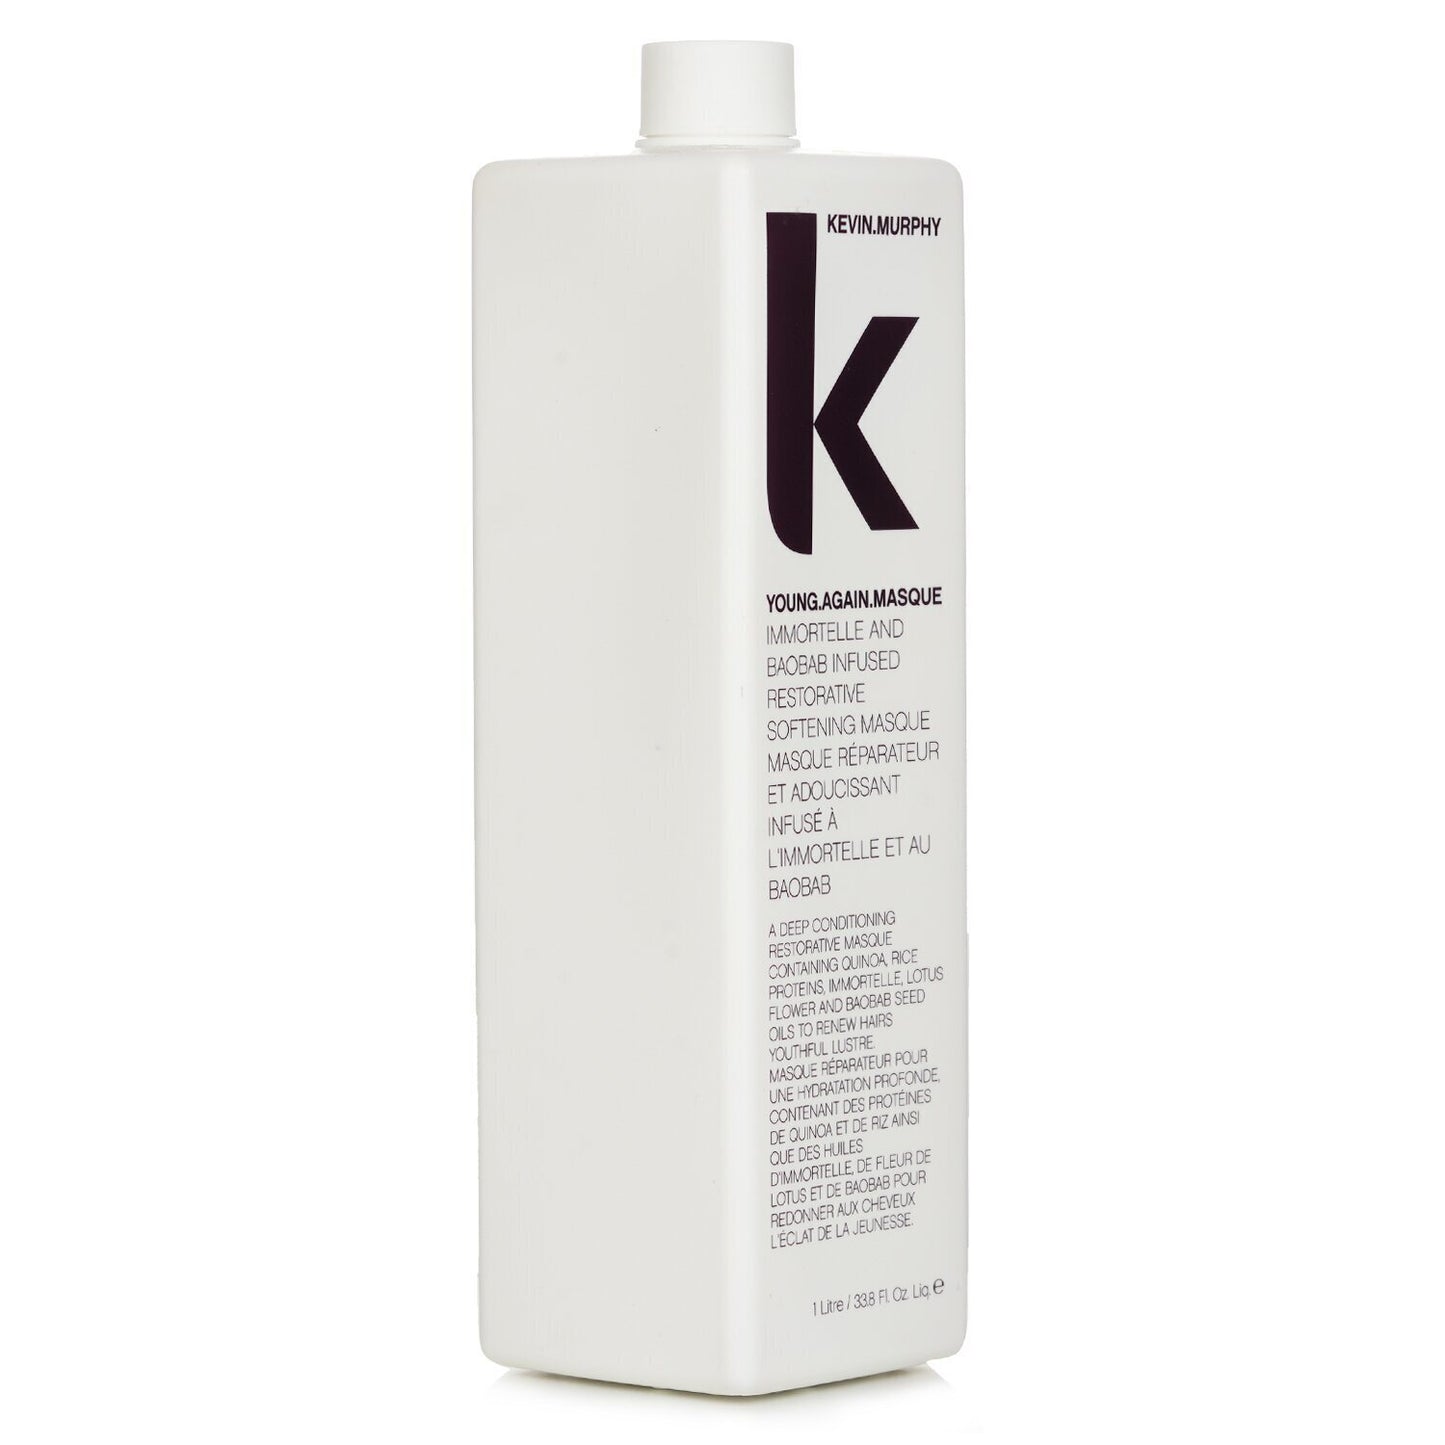 KEVIN.MURPHY - Young.Again.Masque (Immortelle and Baobab Infused Restorative Softening Masque - To Dry Damaged or Brittle Hair)   KMU15414 1000ml/33.8oz